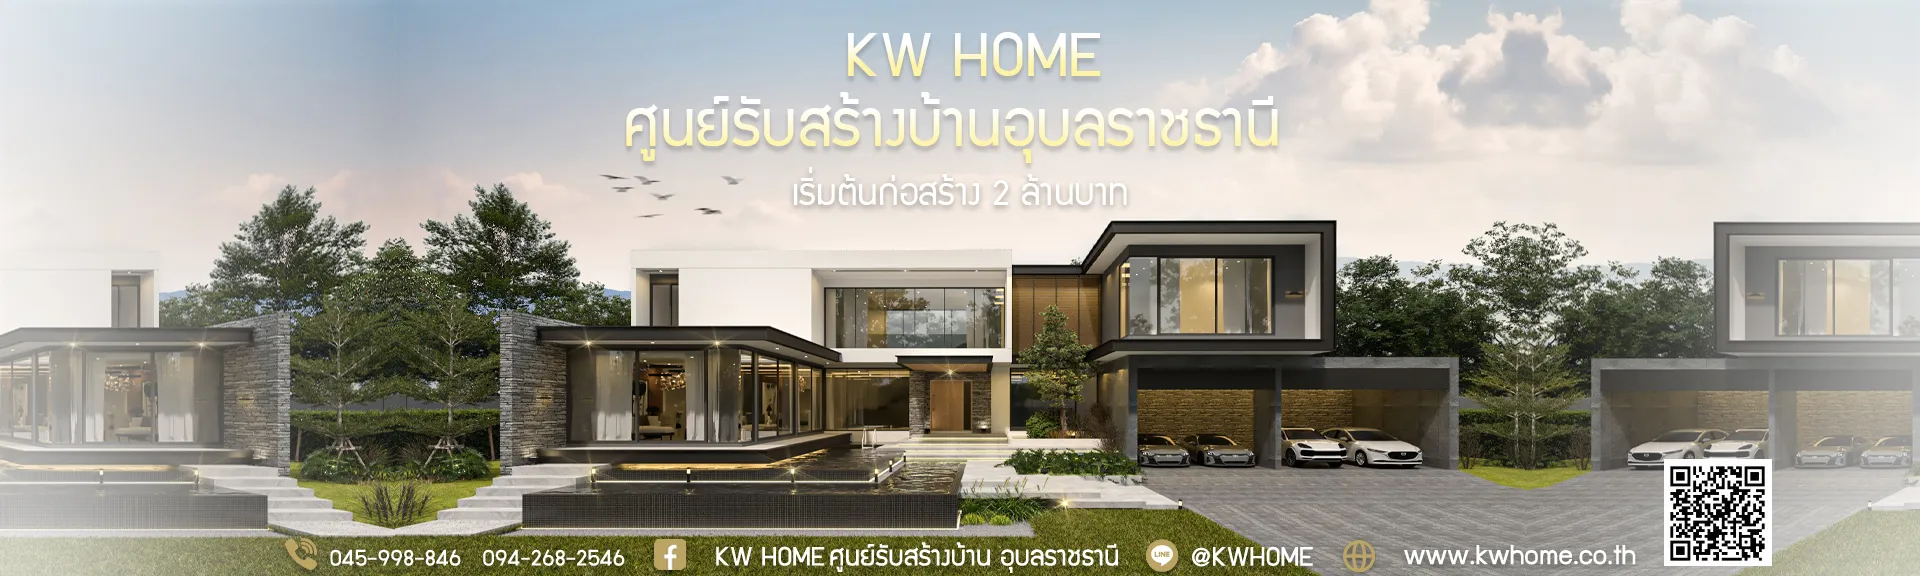 KW HOME